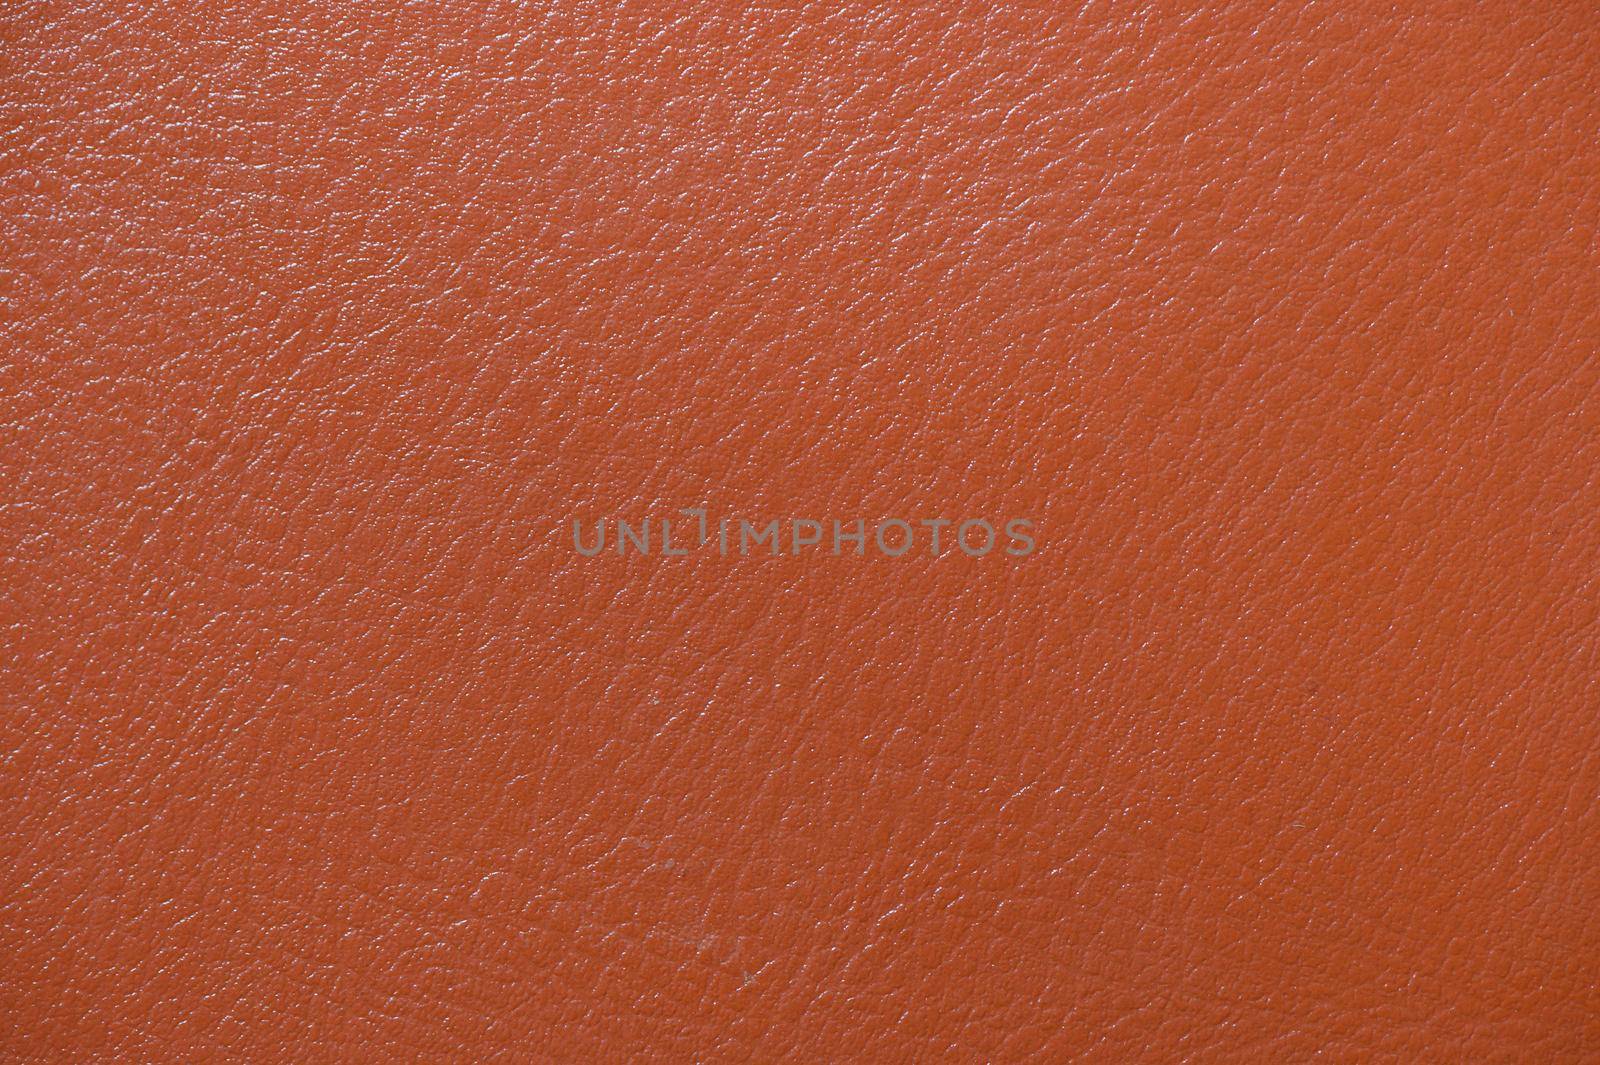 Brown and beige color leather background texture. Close up wallpaper